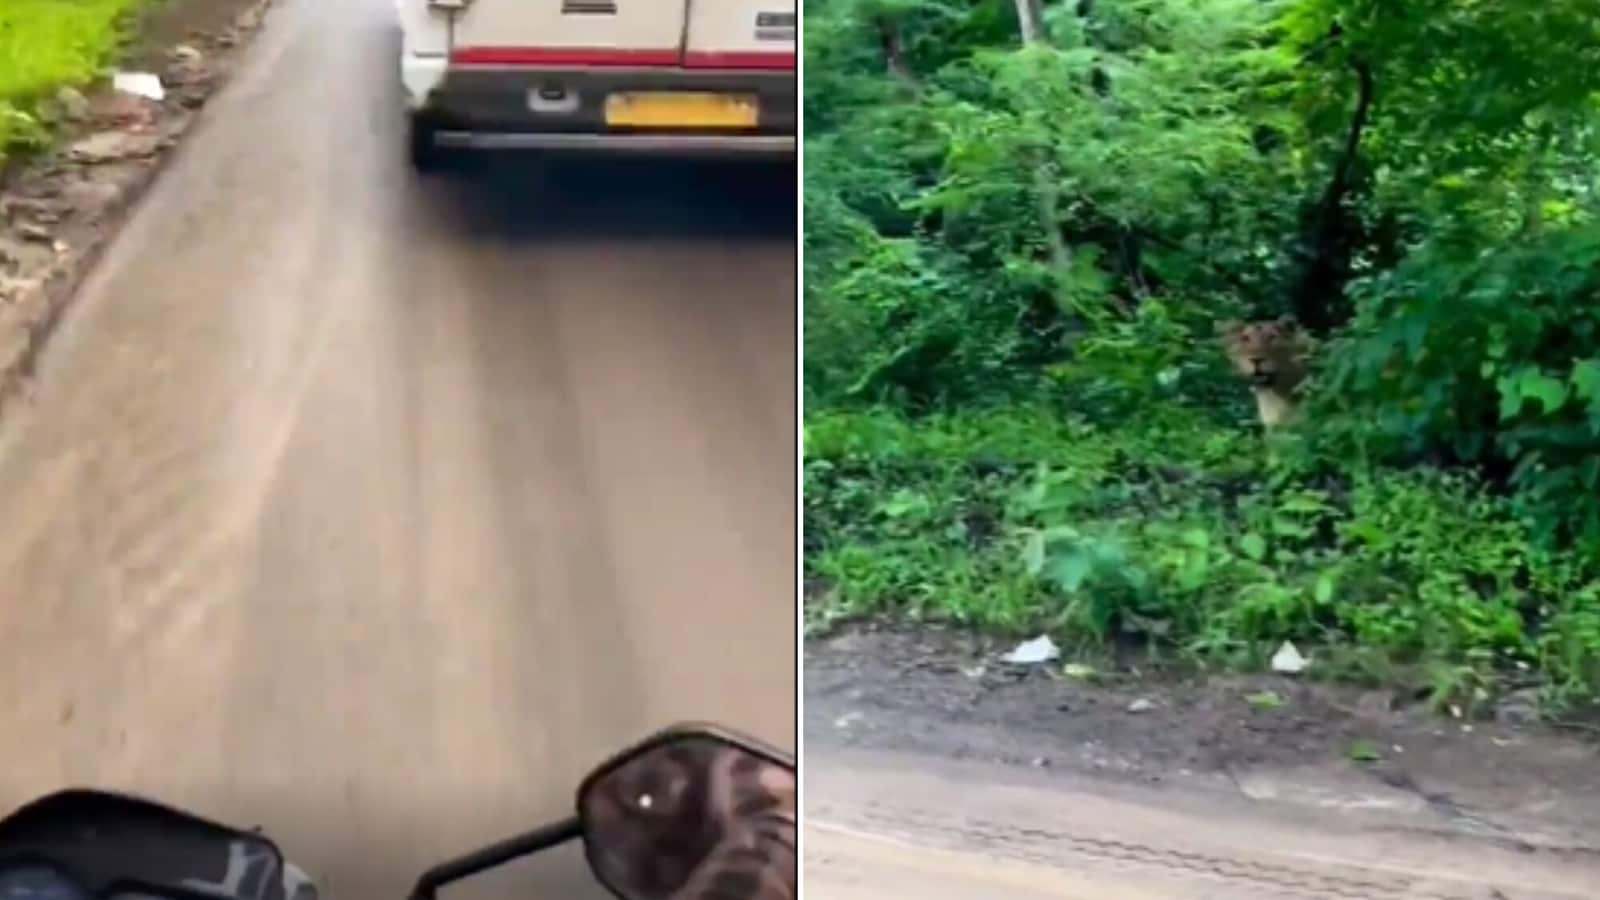 Biker sports big cat staring from bushes, its stare will give you goosebumps